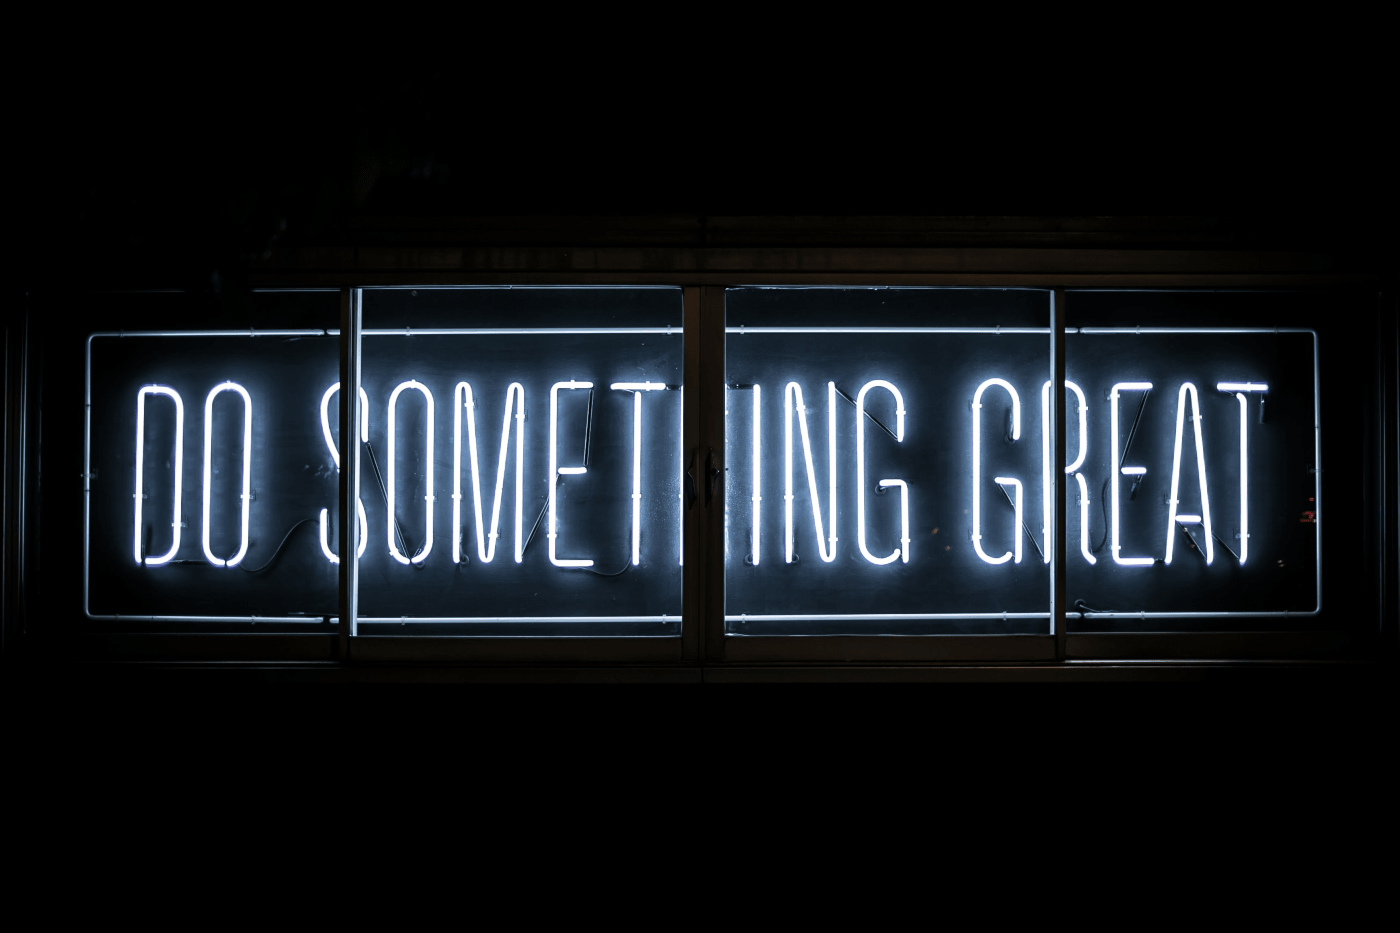 "DO SOMETHING GREAT" neon sign in black background | The magic of setting unrealistic goals in midlife